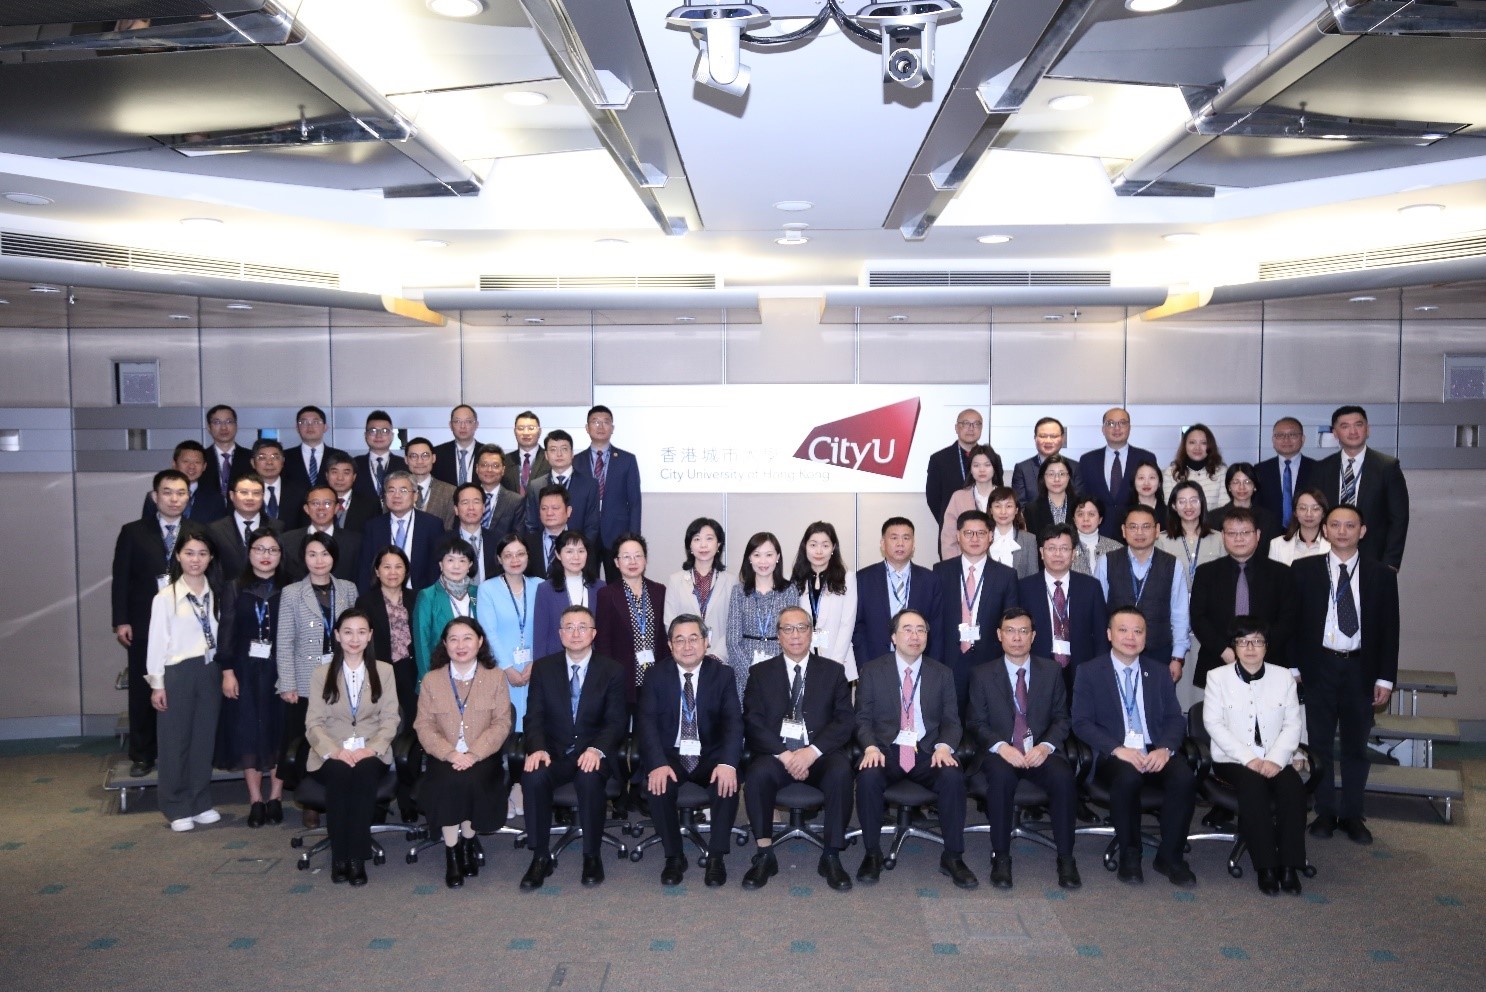 Group photo of the guests and other participating legal experts and scholars